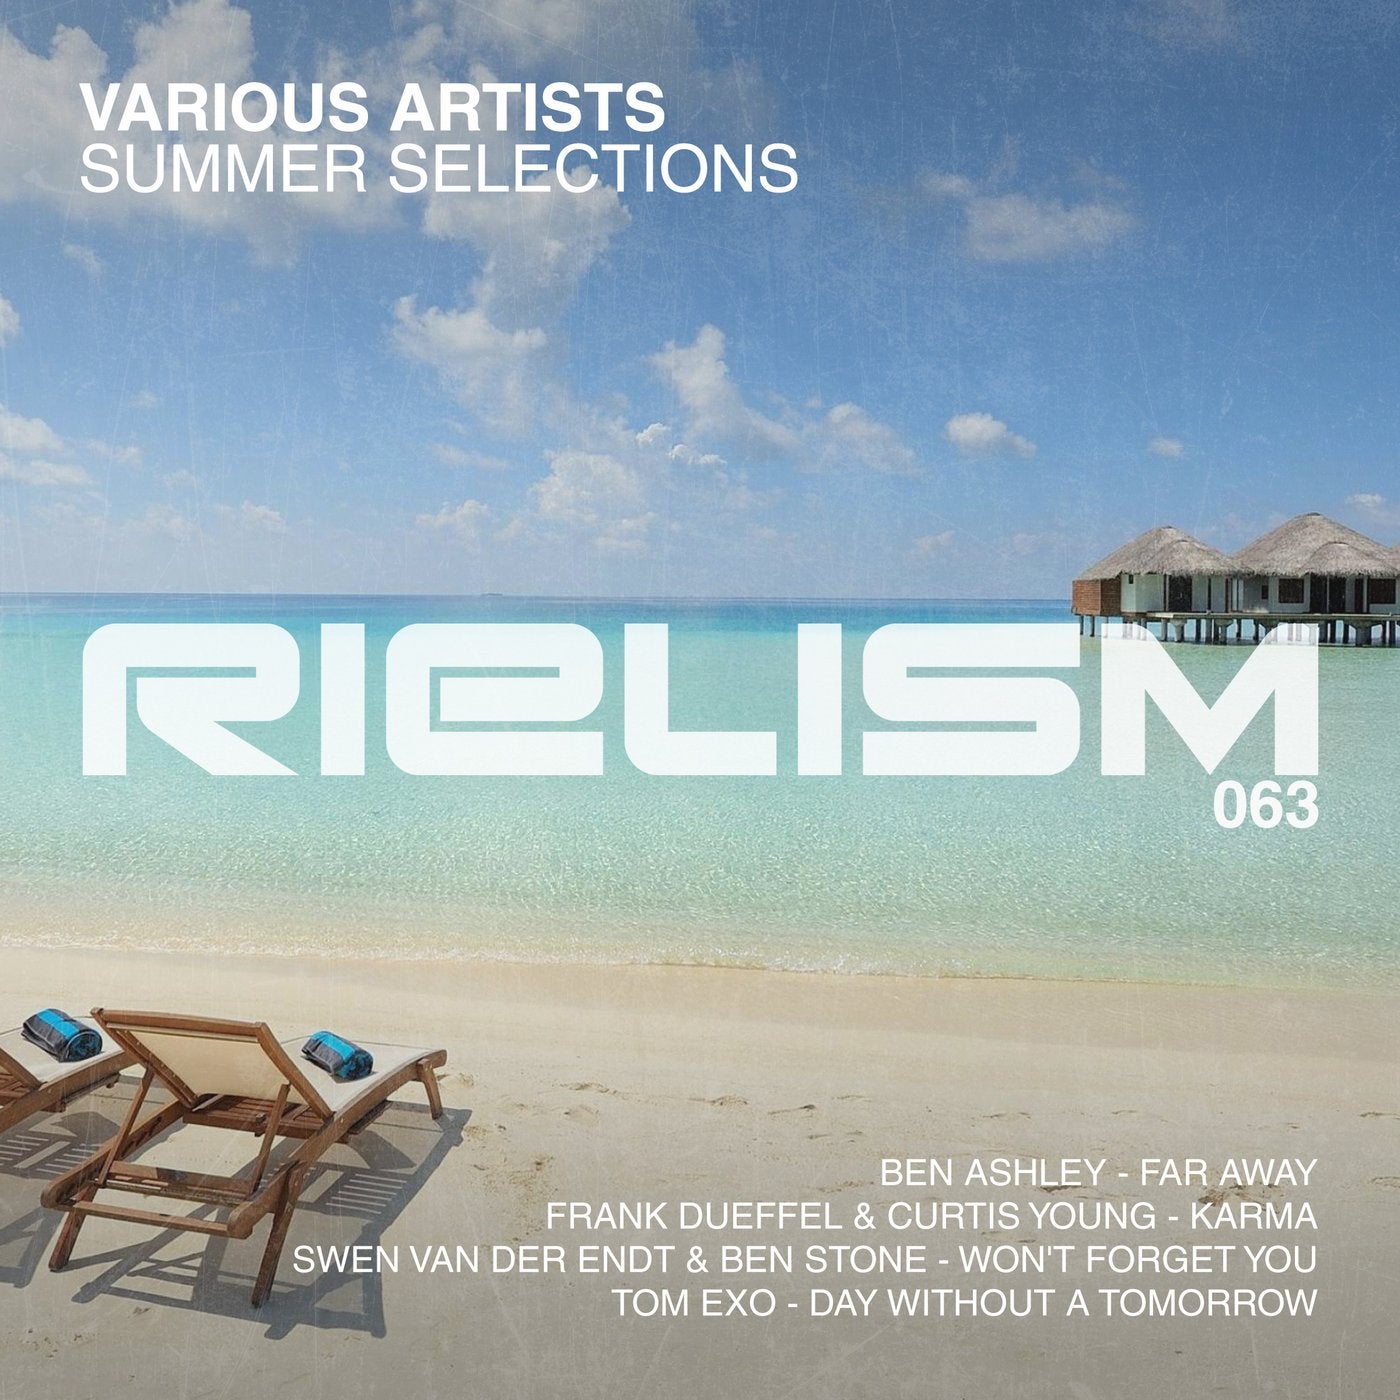 Rielism Summer Selections